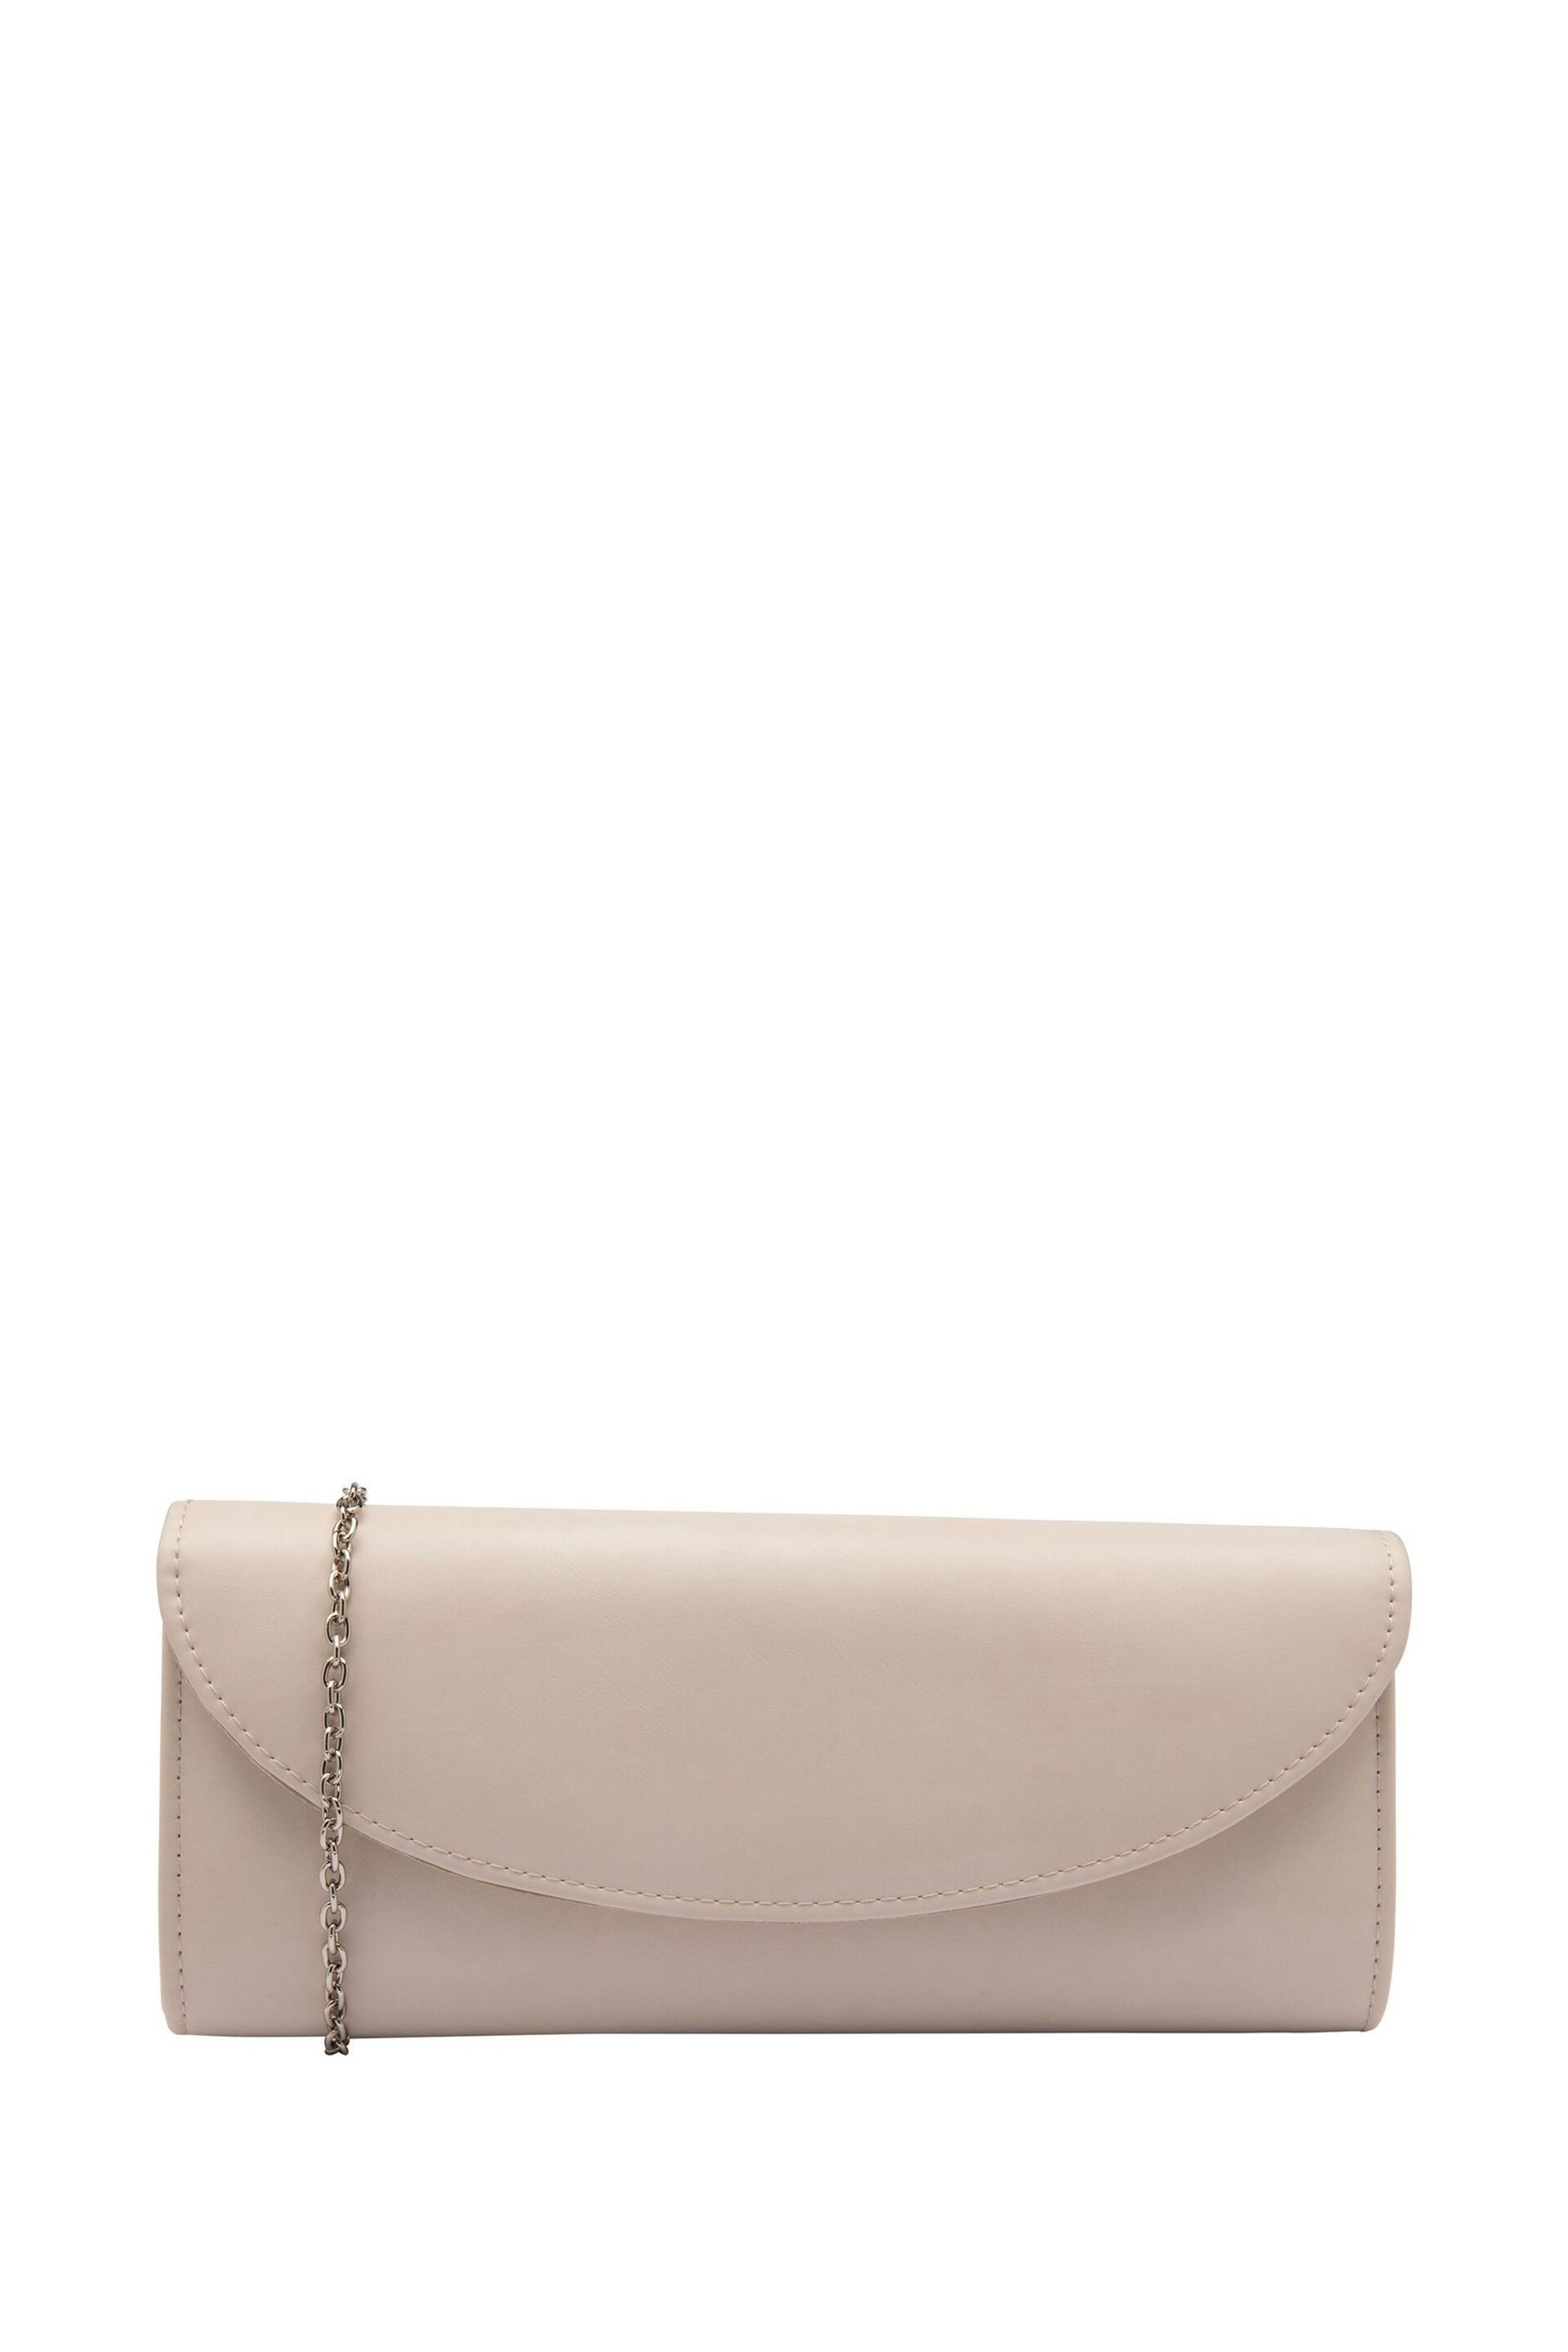 Lotus Nude Clutch Bag with Chain - Image 1 of 4